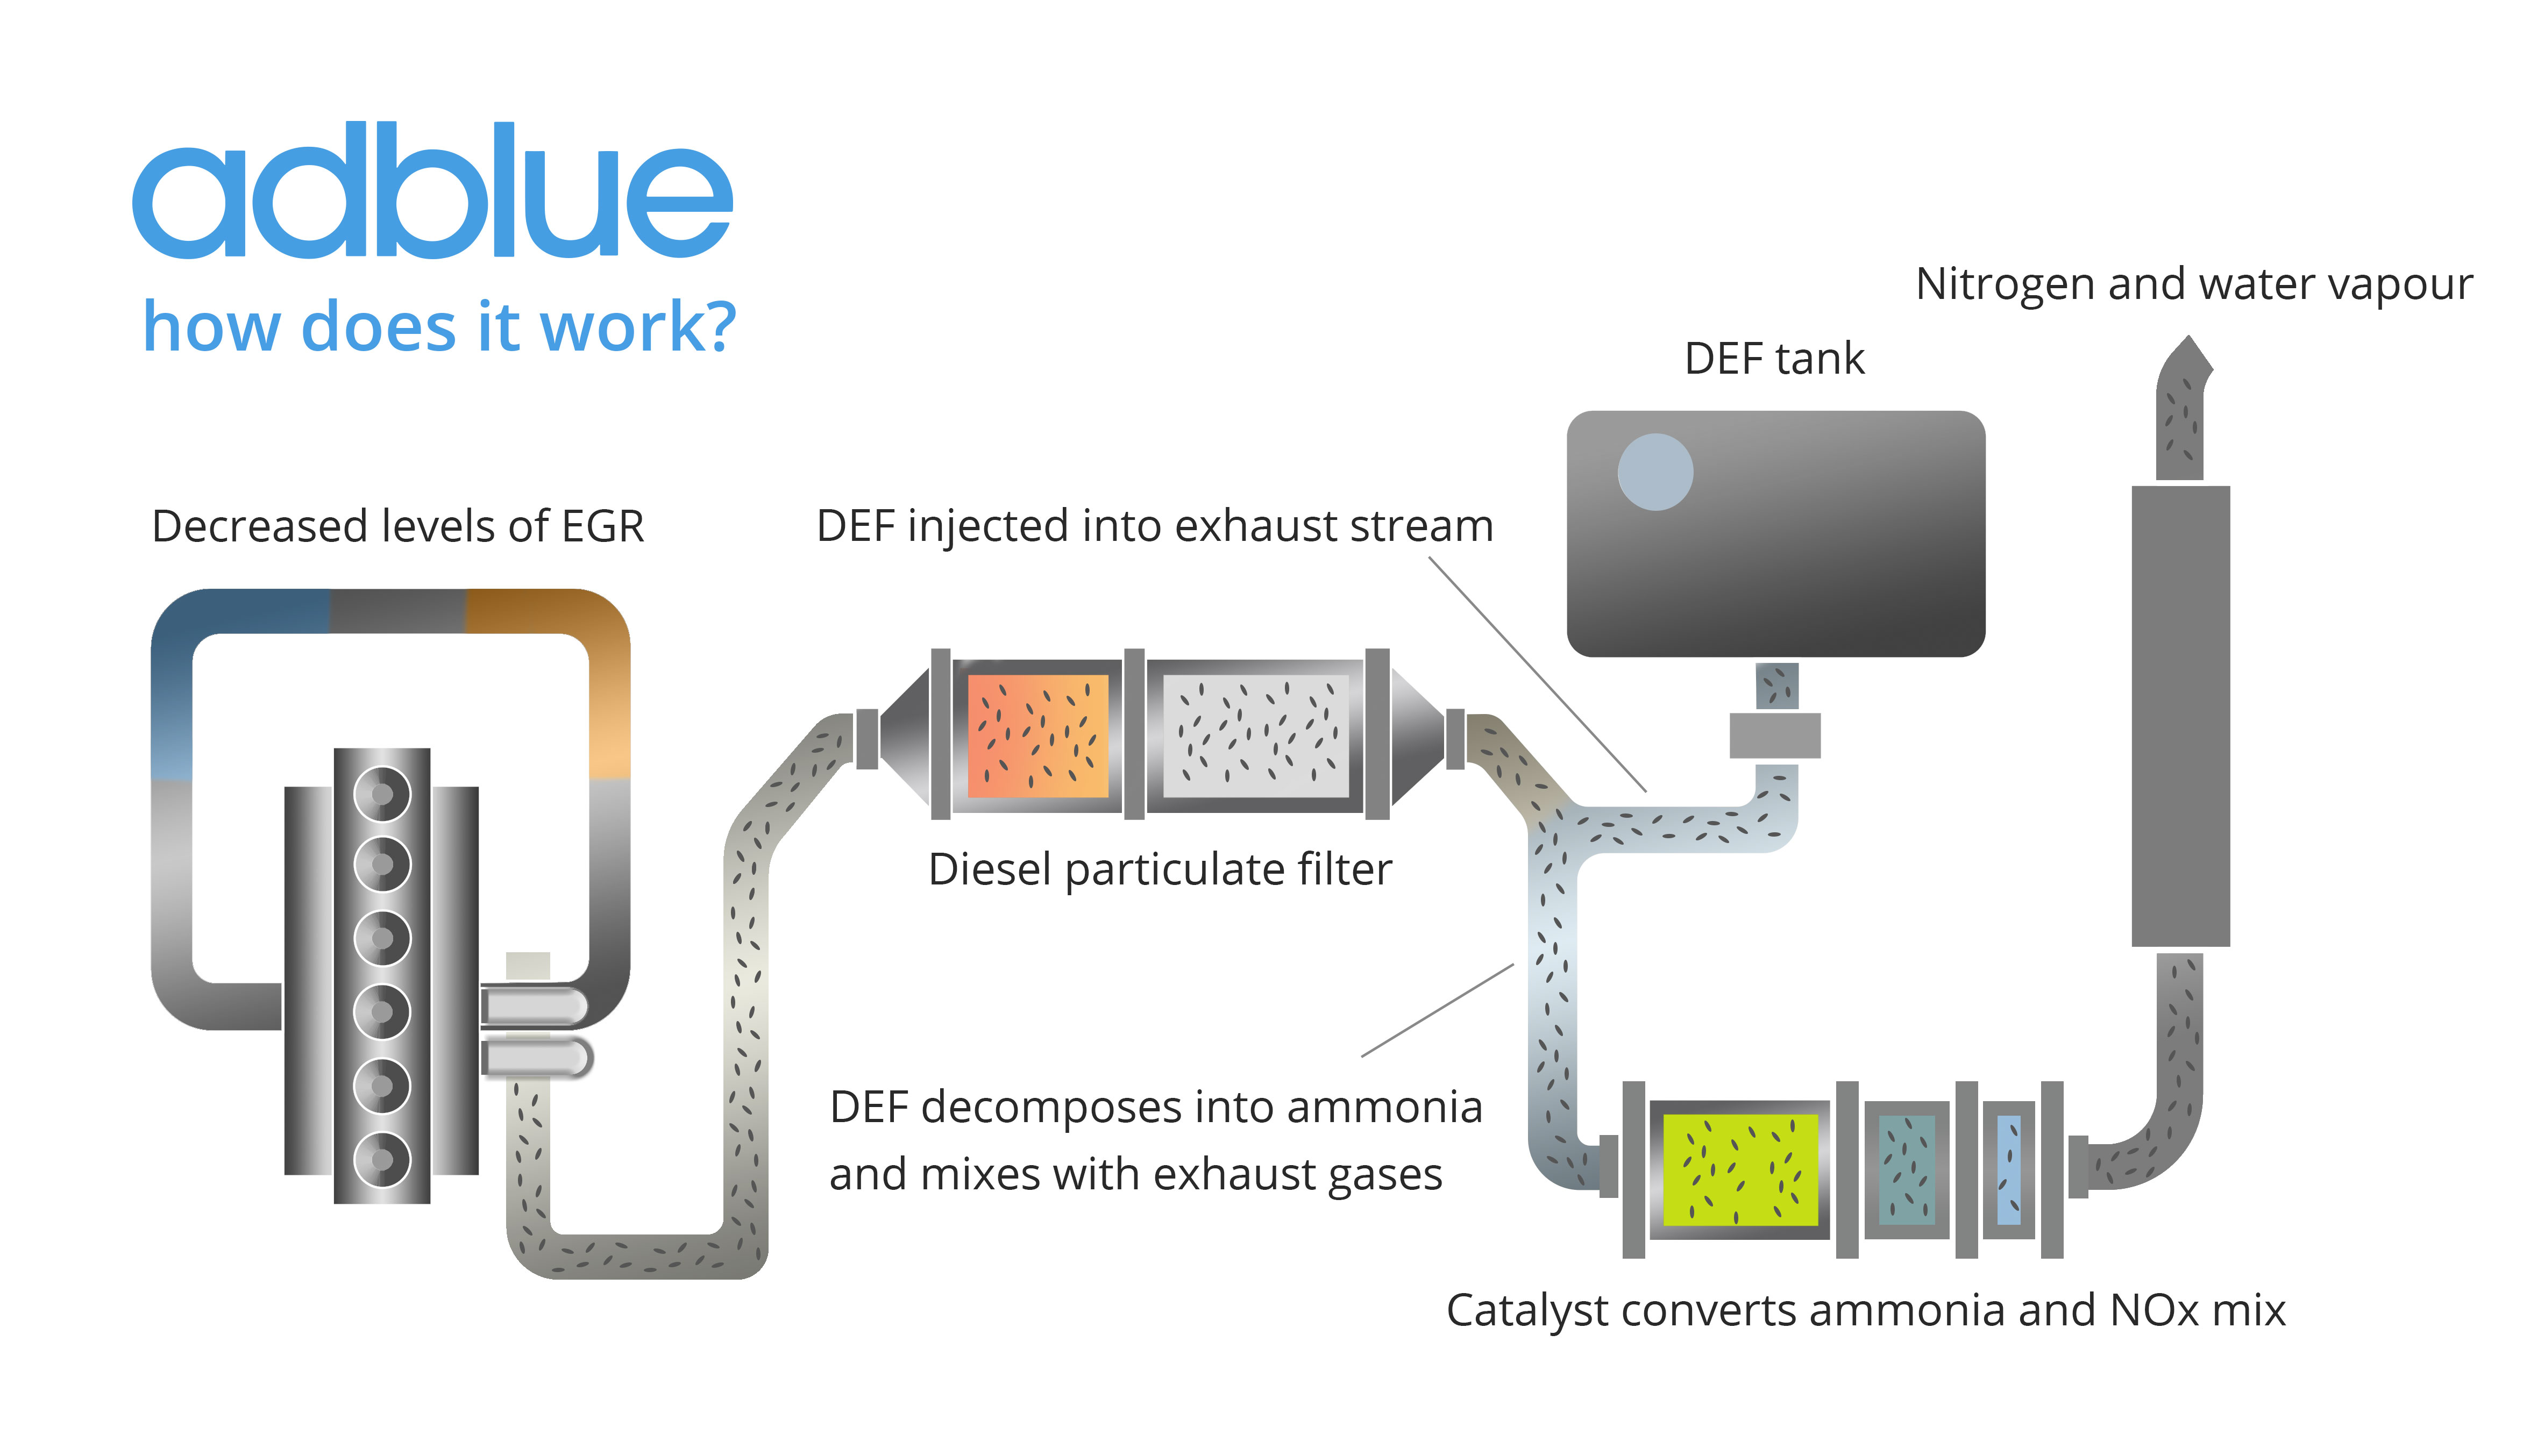 What is AdBlue and why do you need it?